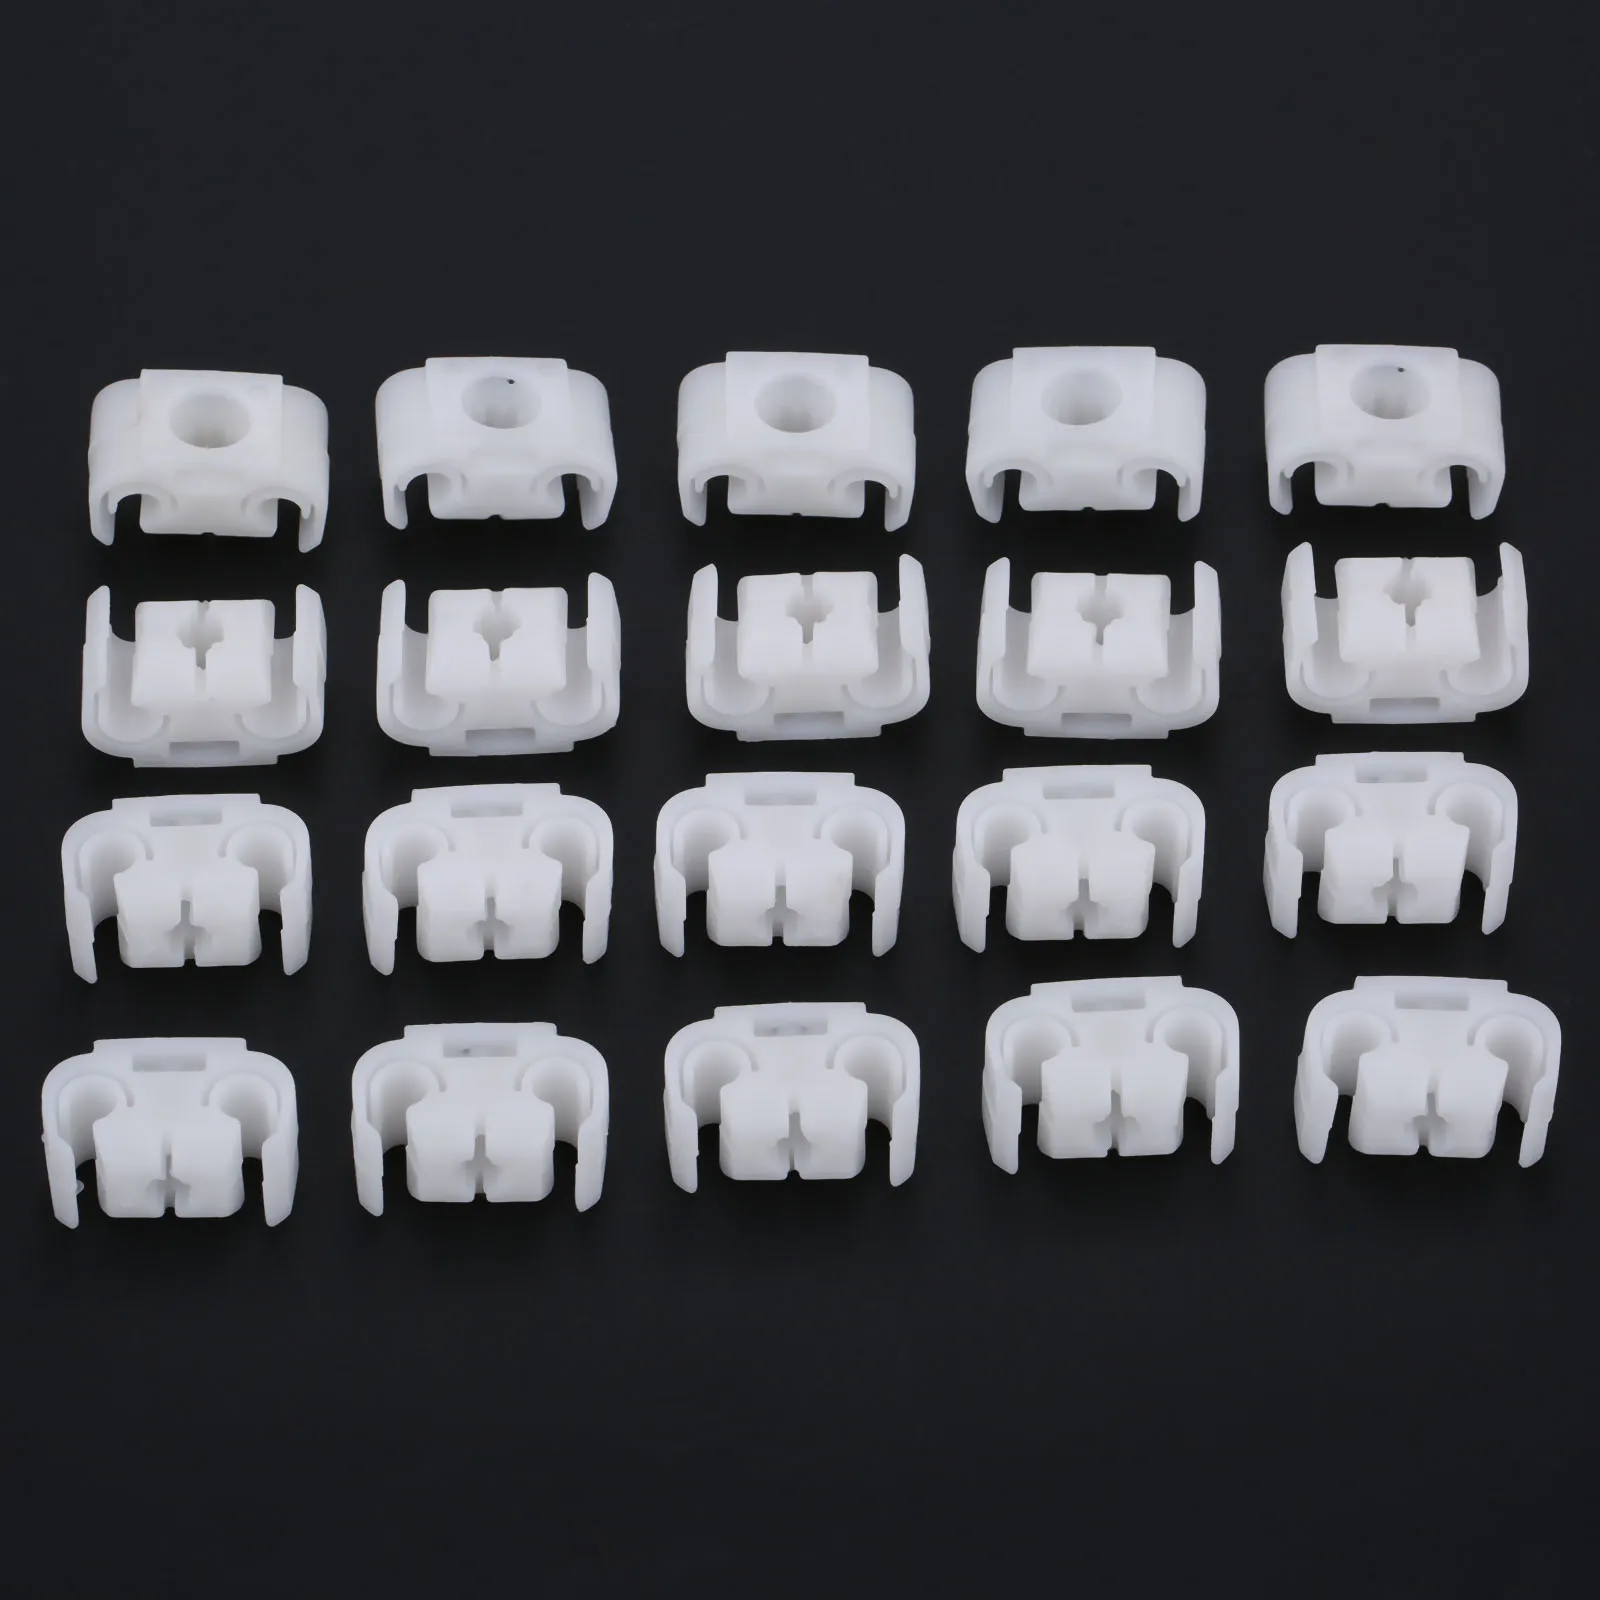 20Pcs Brake Cable Bracket Pipe Body Retaining Clip Holder Fasteners 811611797 For VW Golf Passat forJetta Audi A4 A6 Skoda Seat